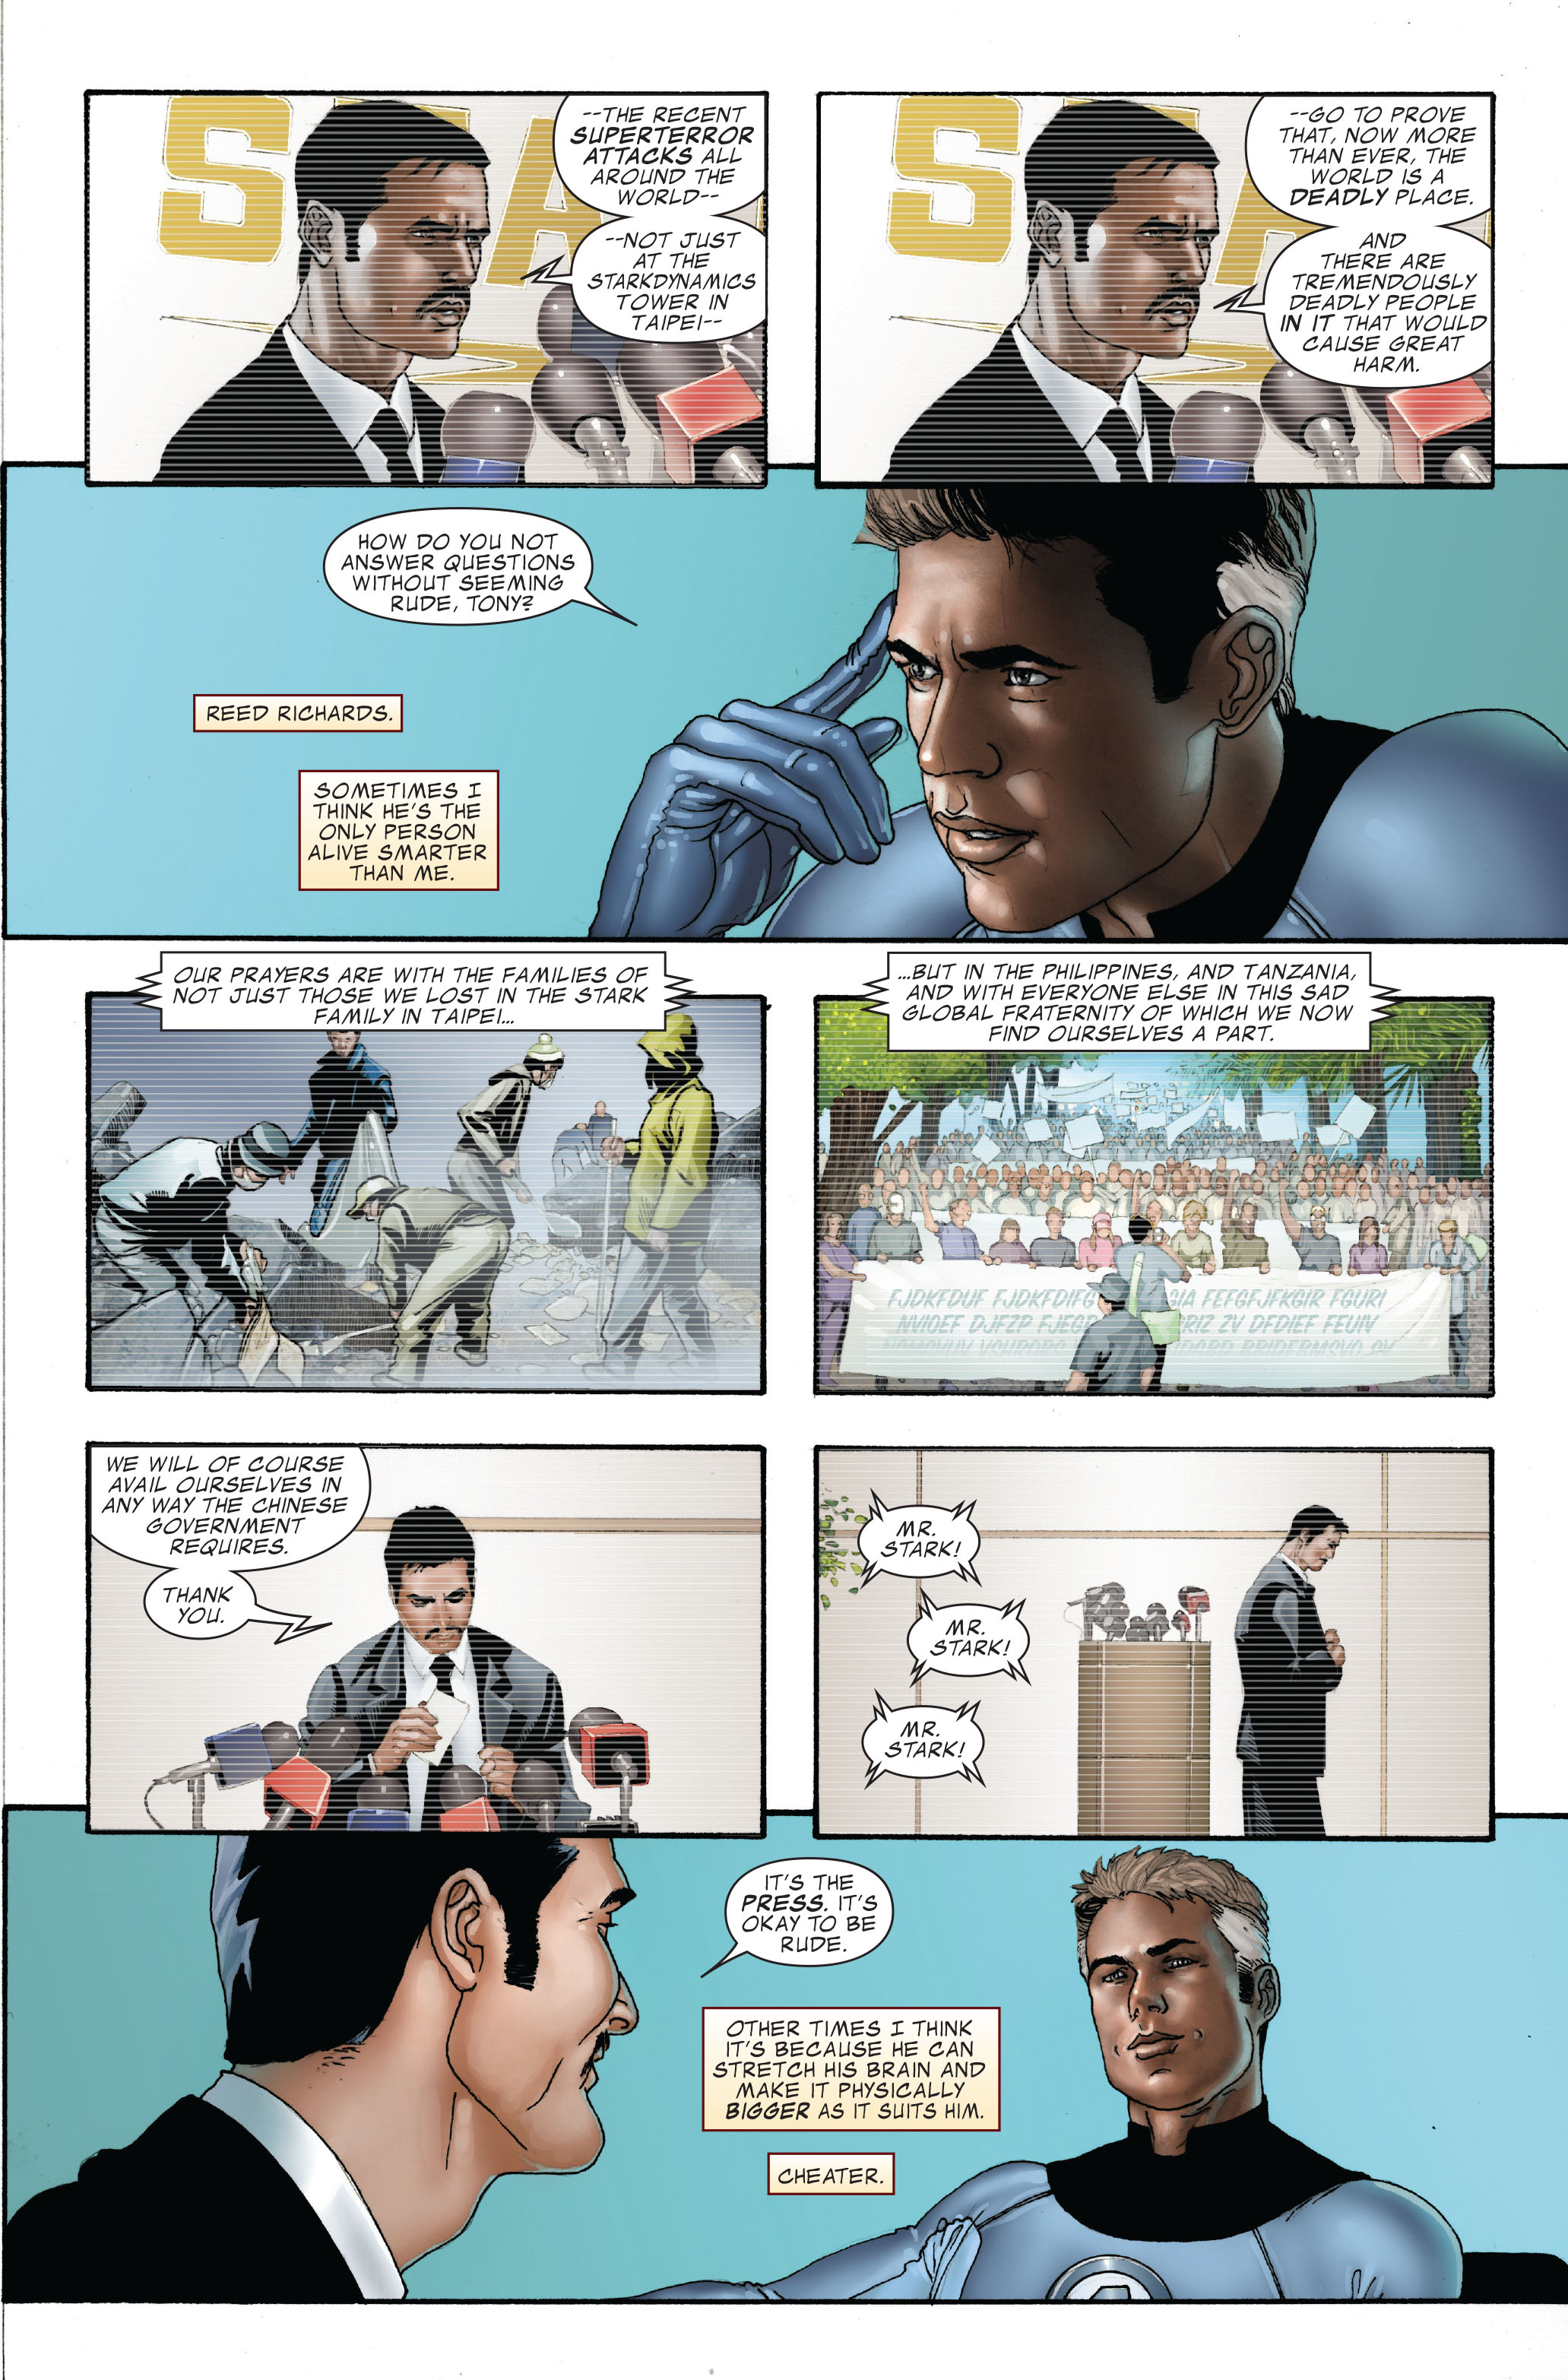 Invincible Iron Man (2008) 4 Page 1